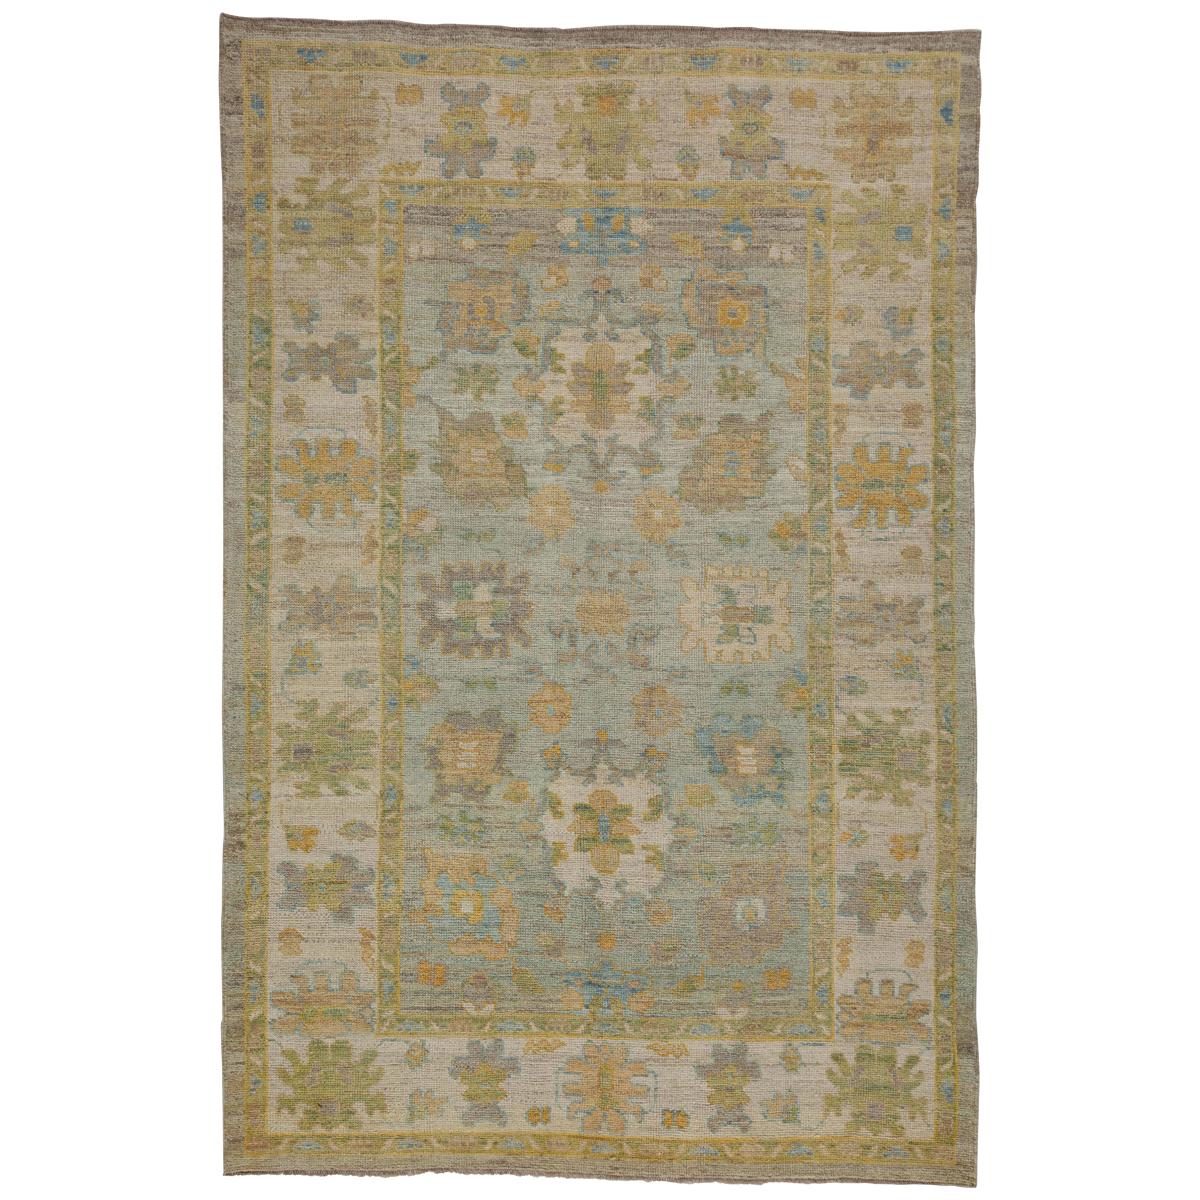 Modern Turkish Rug Handwoven Oushak Style with Blue and Beige Mixed Floral Field